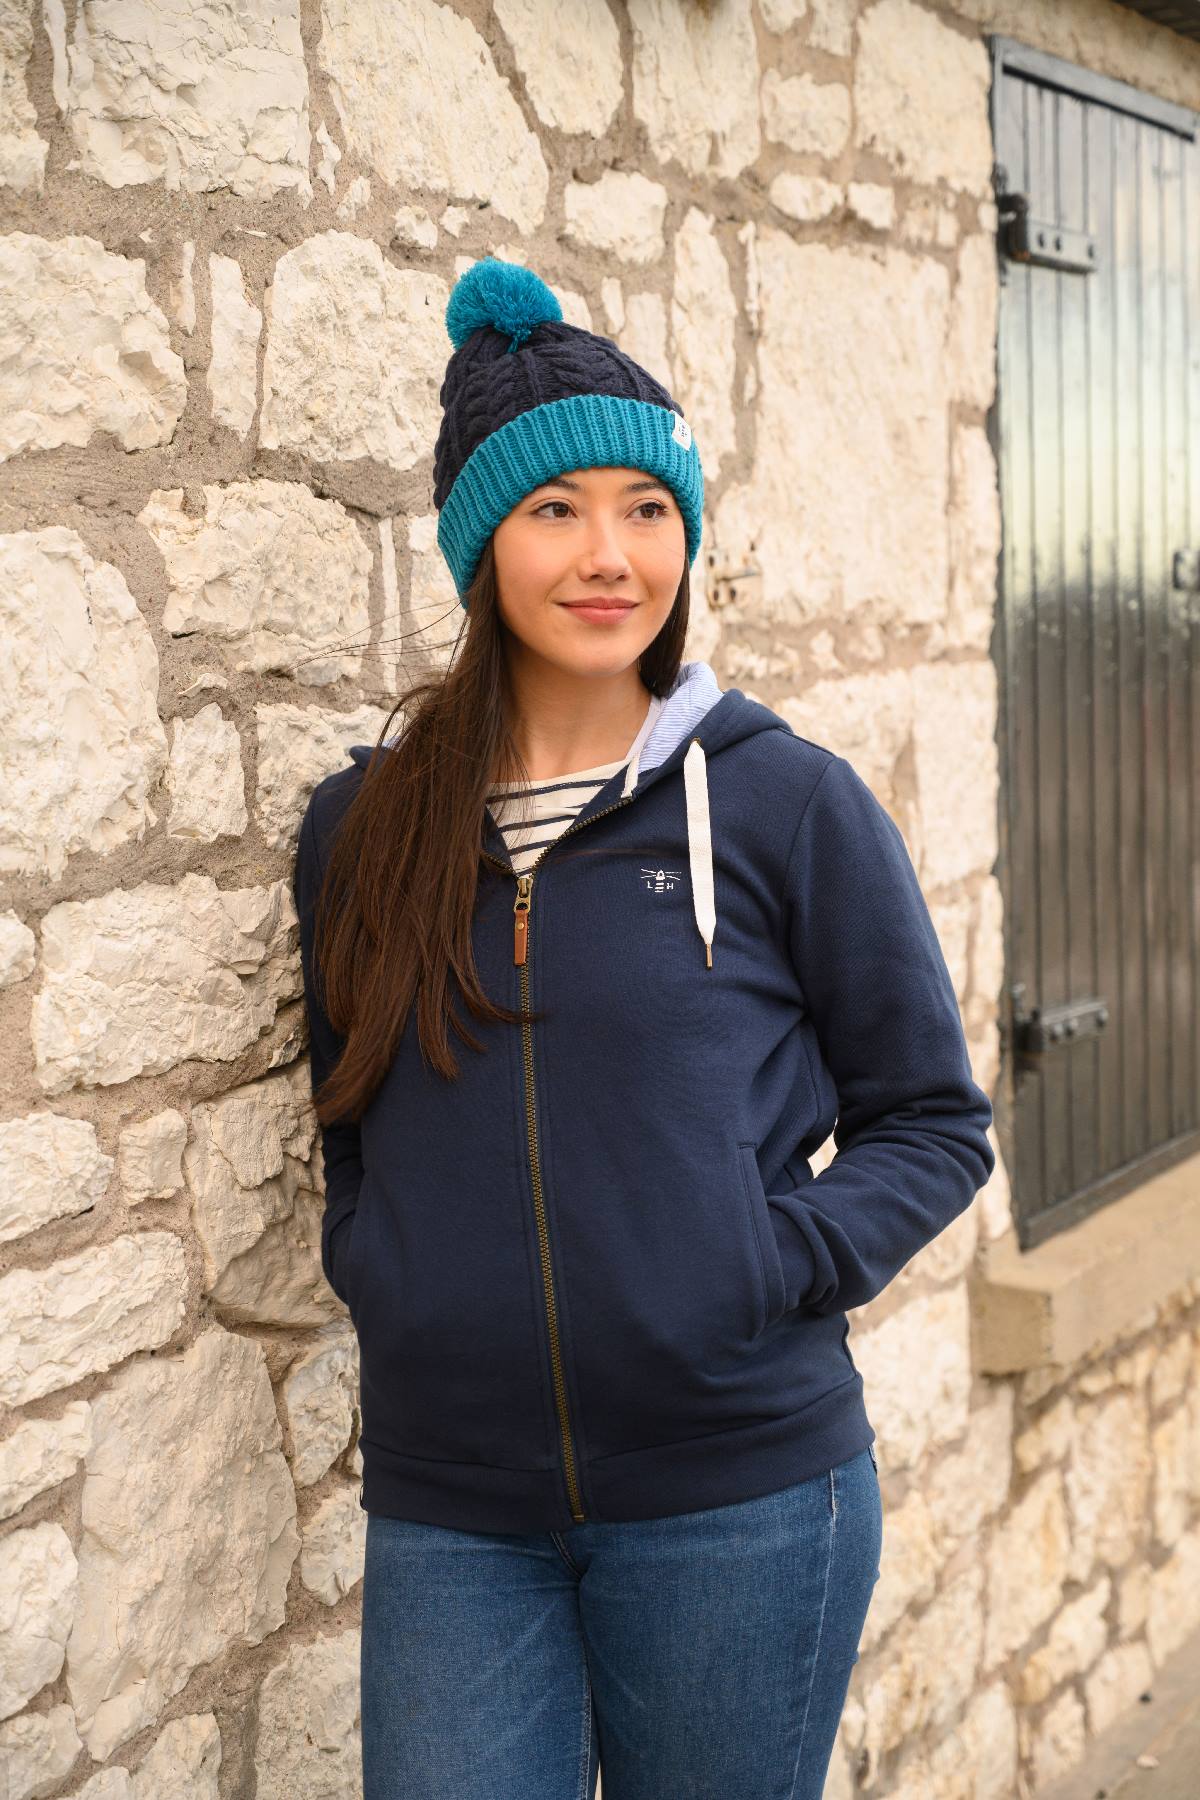 Strand Hooded Top - Navy - Lighthouse